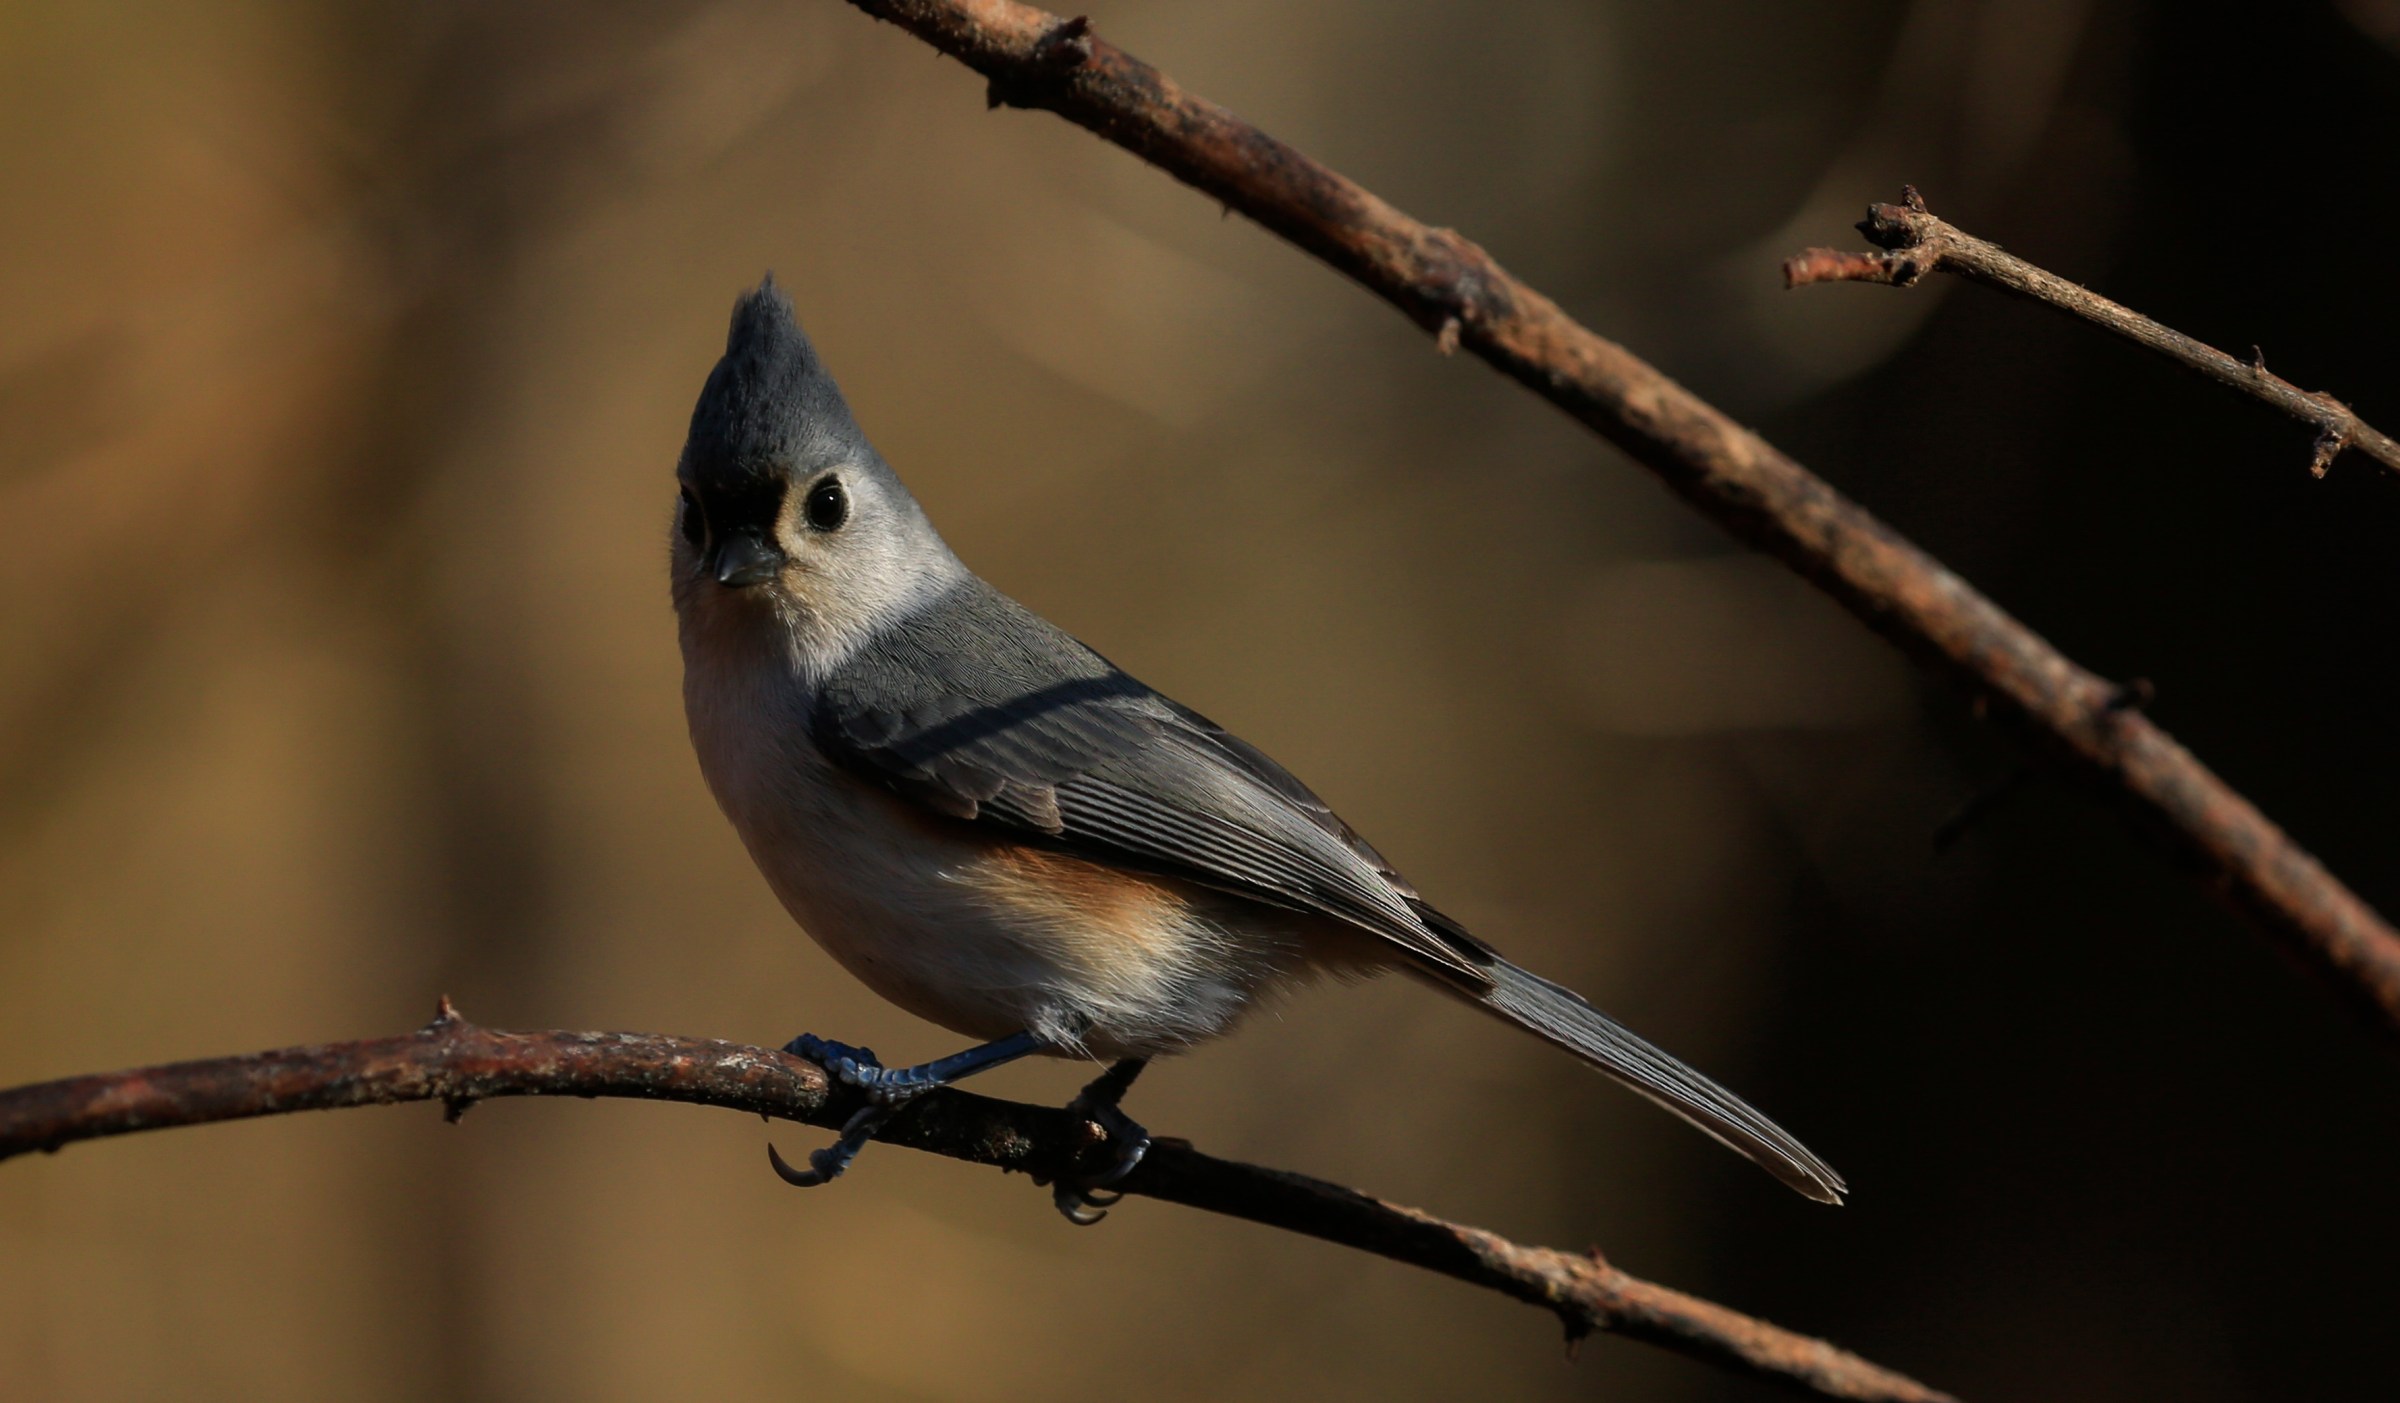 A Tufted Titmouse stands on a branch as Robert DeCandido also known as "Birding Bob" leads a group of bird watchers during a tour in Central Park, New York on November 29, 2020. - On a recent sunny morning in New York a few dozen people gathered in Central Park's wooded Ramble area with a common goal: zero in on an elusive owl. Autumn leaves crunch under their shoes as "Birding Bob" -- a guide who has been organizing birdwatching tours in the park for more than three decades, with interest jumping since the coronavirus pandemic hit the city in March -- leads them along winding paths. (Photo by Kena Betancur / AFP) (Photo by KENA BETANCUR/AFP via Getty Images)